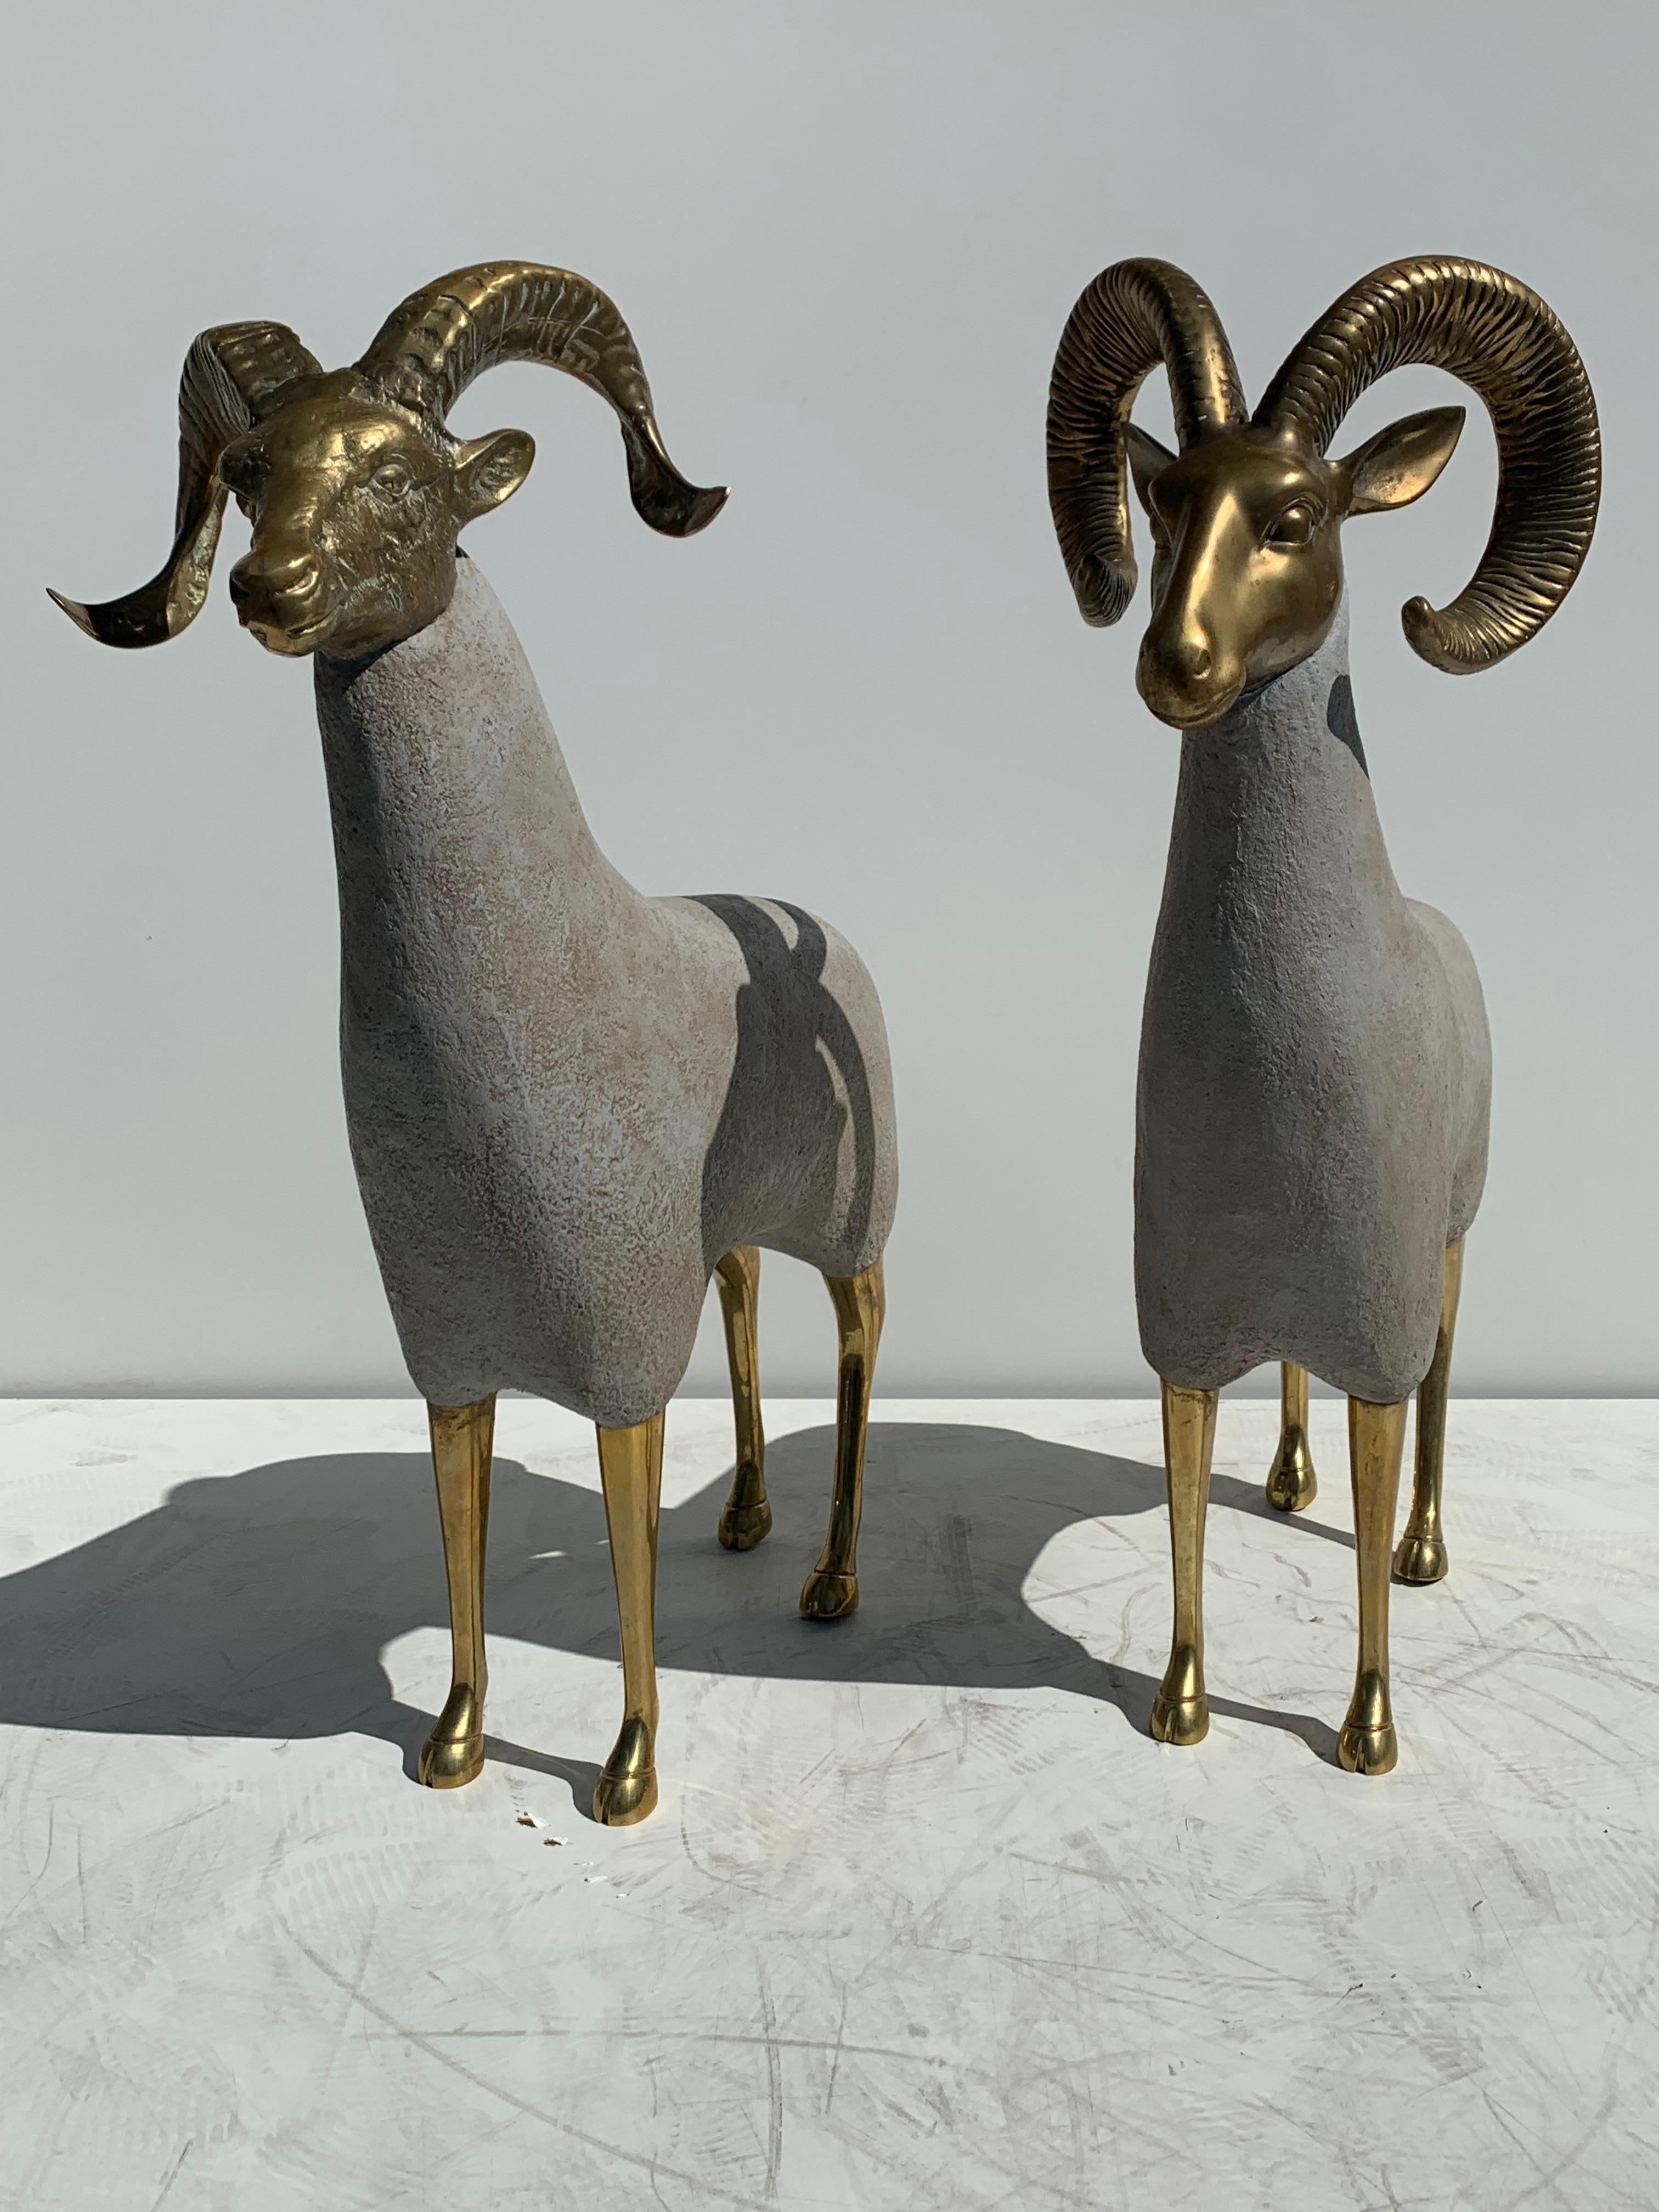 Pair of brass ram or mountain sheep sculptures in the style of Lalanne.  Solid brass heads are vintage from 1970s and retain original patina. Body is newly made of wood and covered in papier mâché to look like concrete (not suggested to keep it on